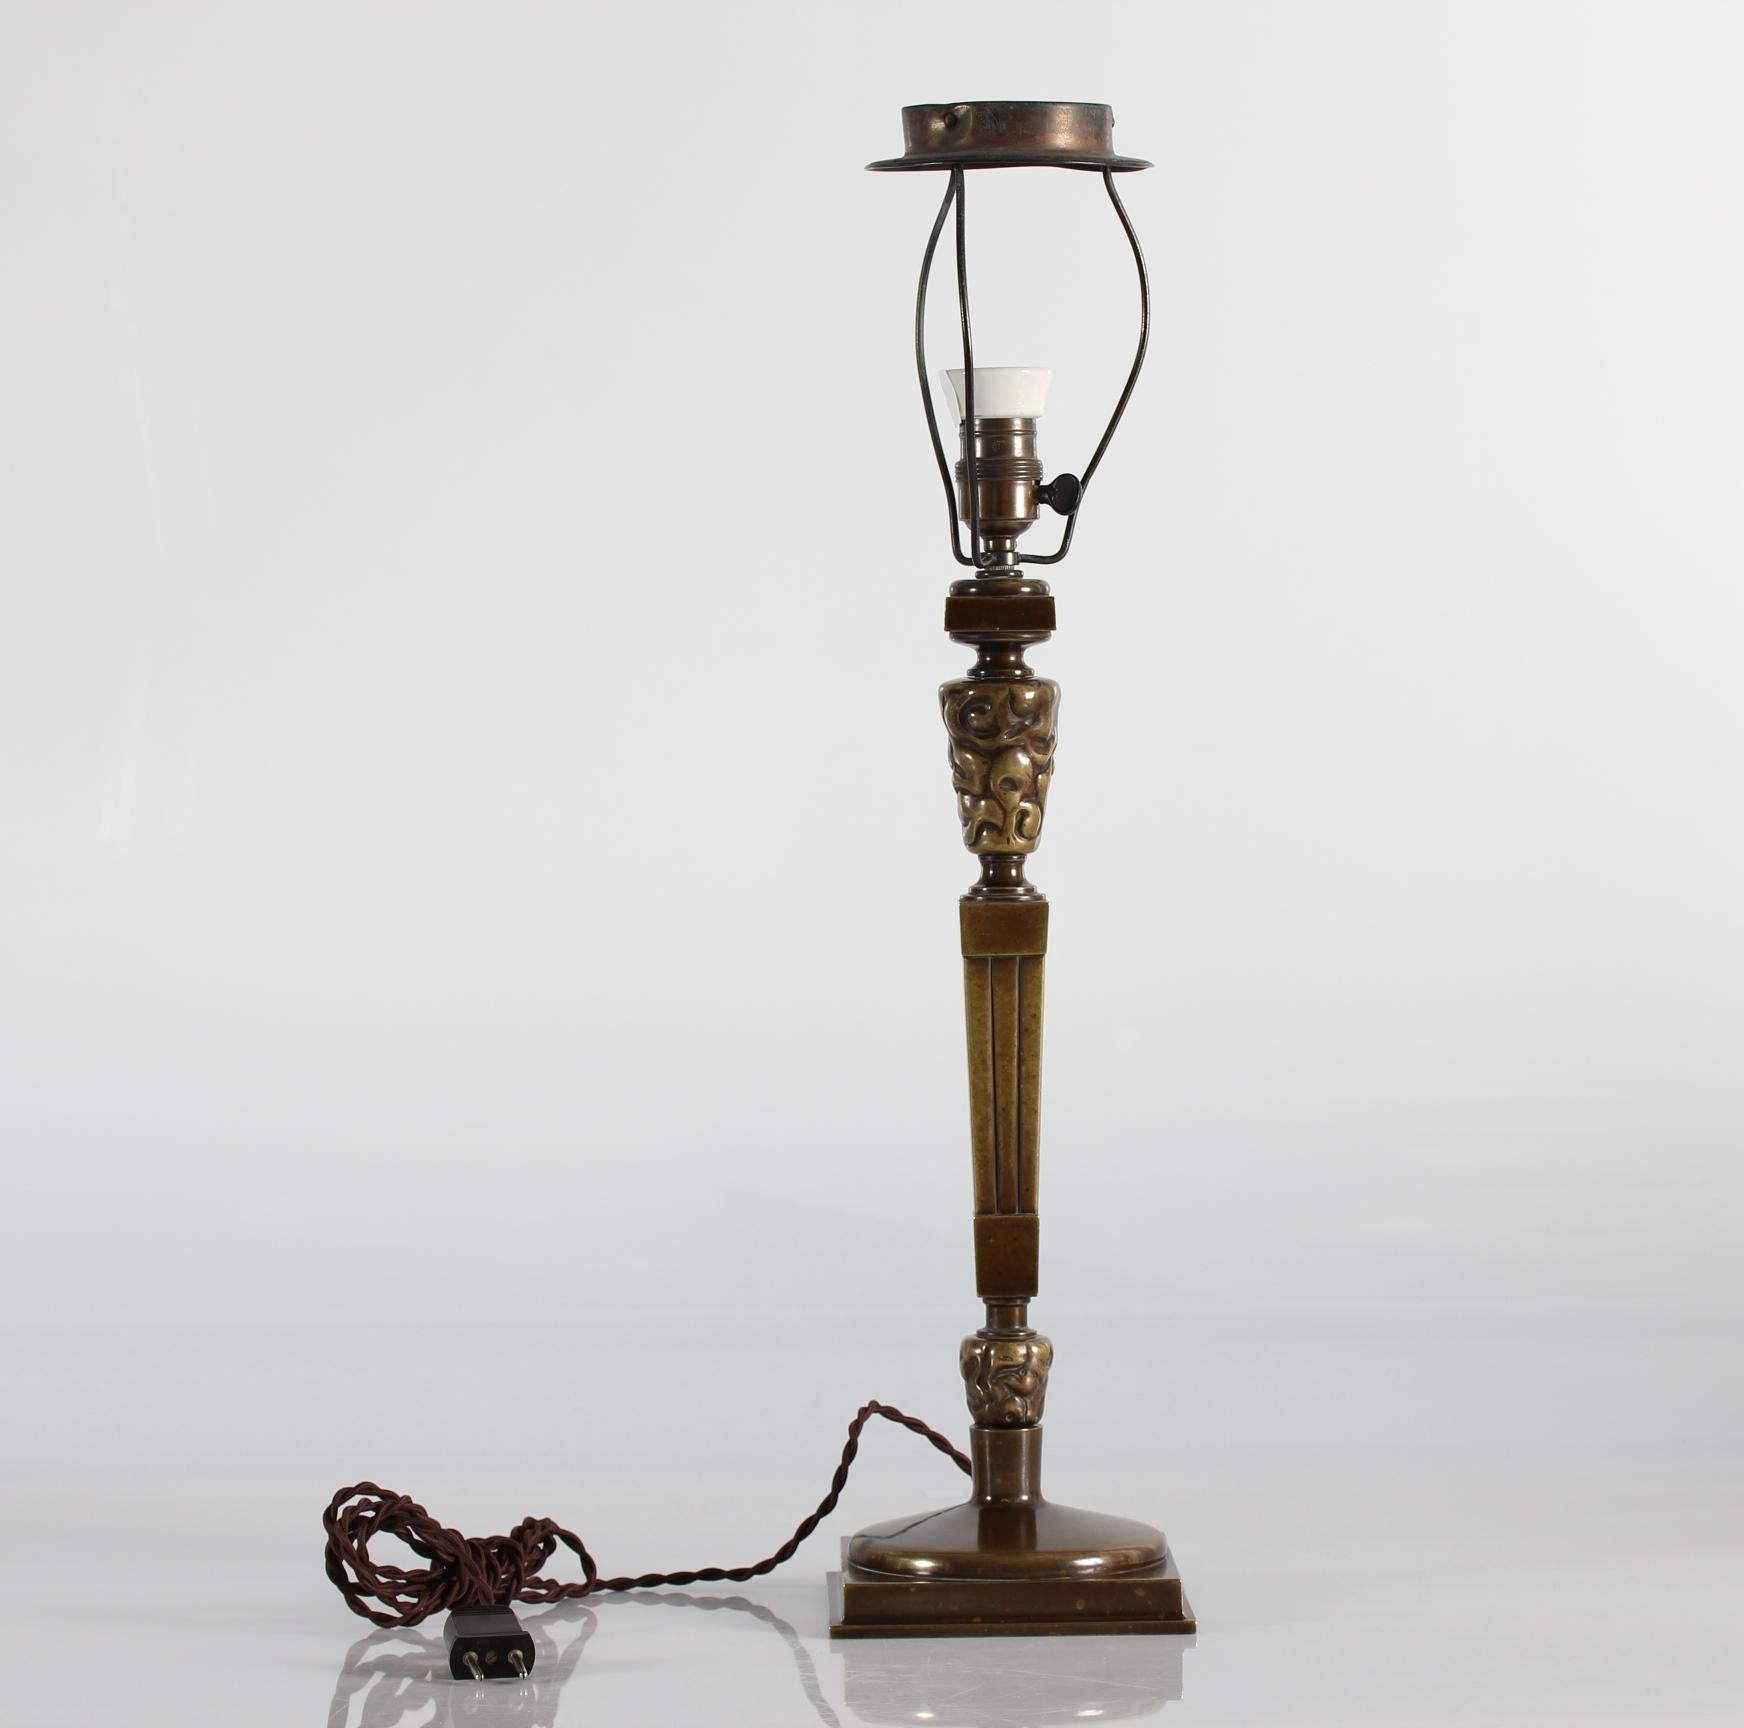 Danish Thorvald Bindesbøll High Art Nouveau Table Lamp 1890s Patinated Bronze For Sale 6